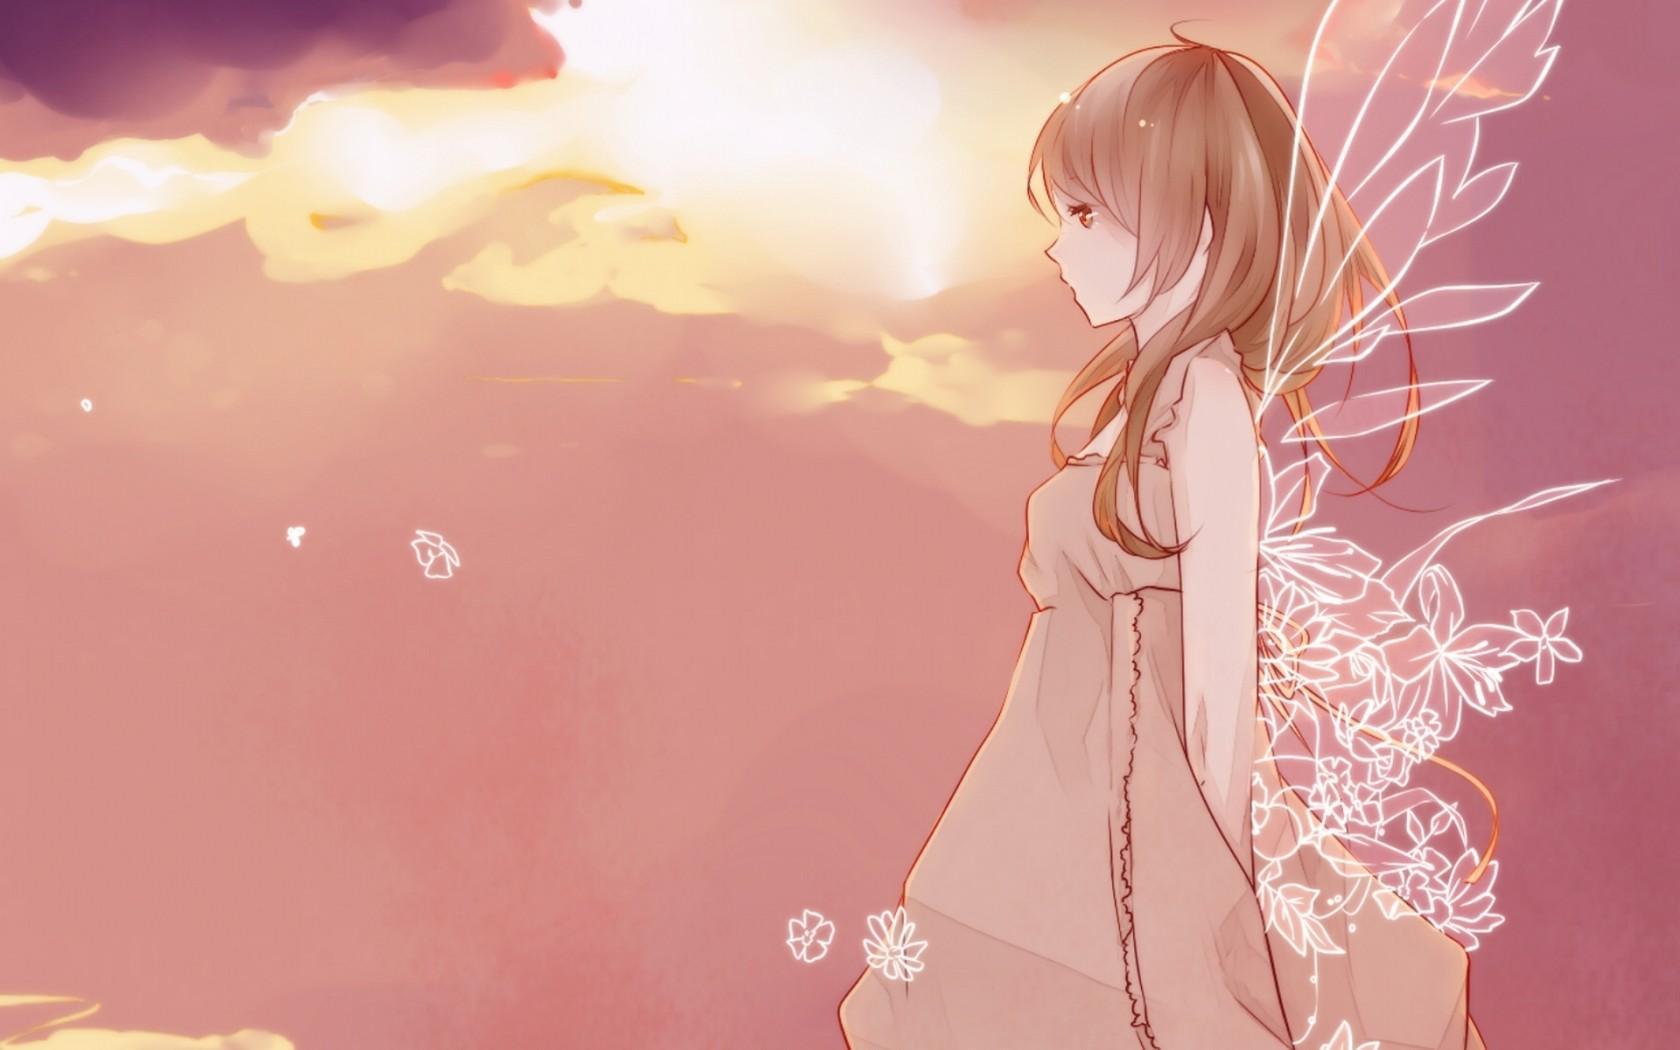 My Dream World - Anime Girl With Star Wings - HD Wallpaper 